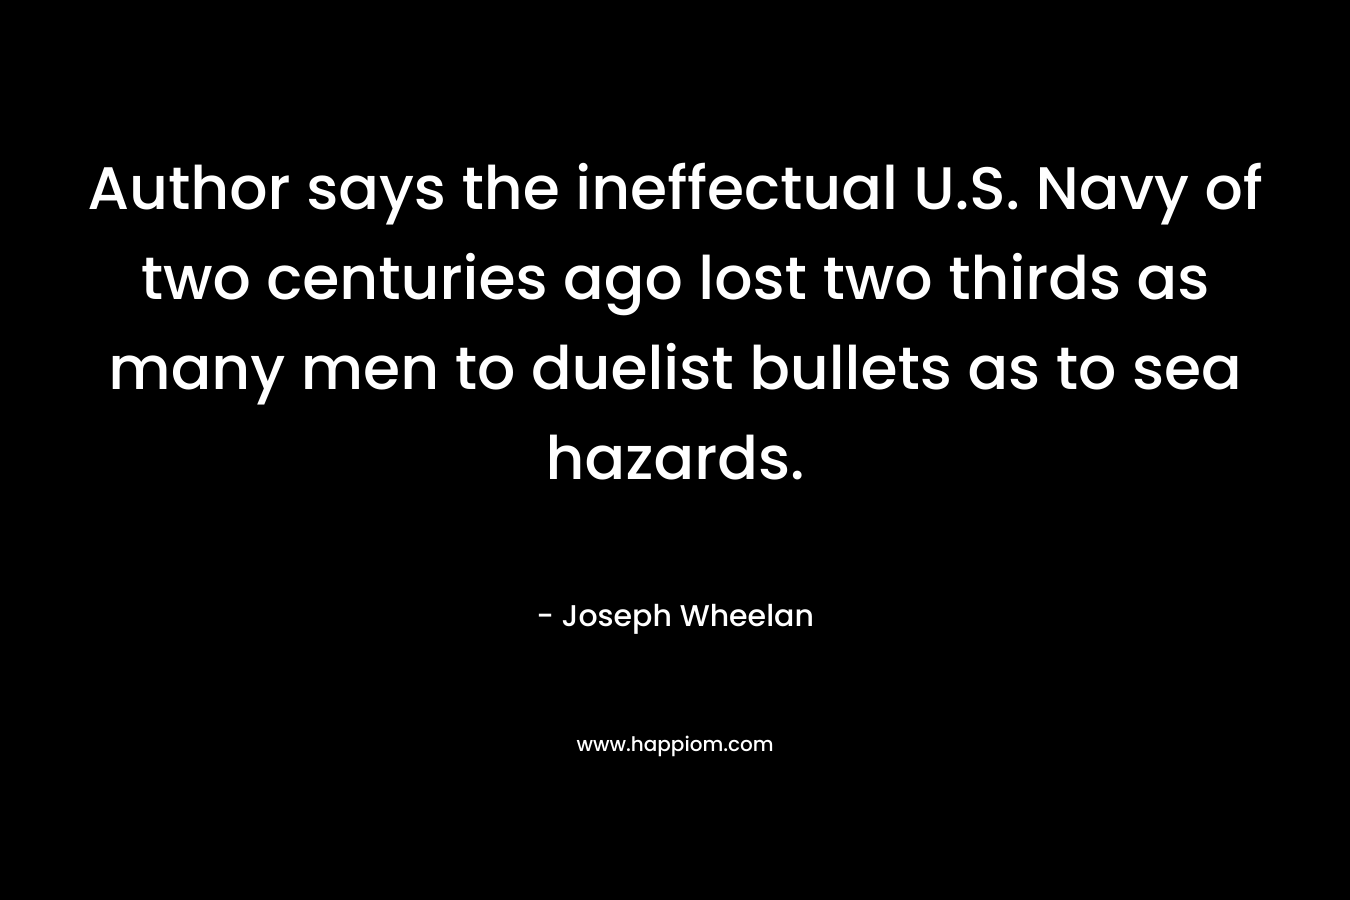 Author says the ineffectual U.S. Navy of two centuries ago lost two thirds as many men to duelist bullets as to sea hazards. – Joseph Wheelan